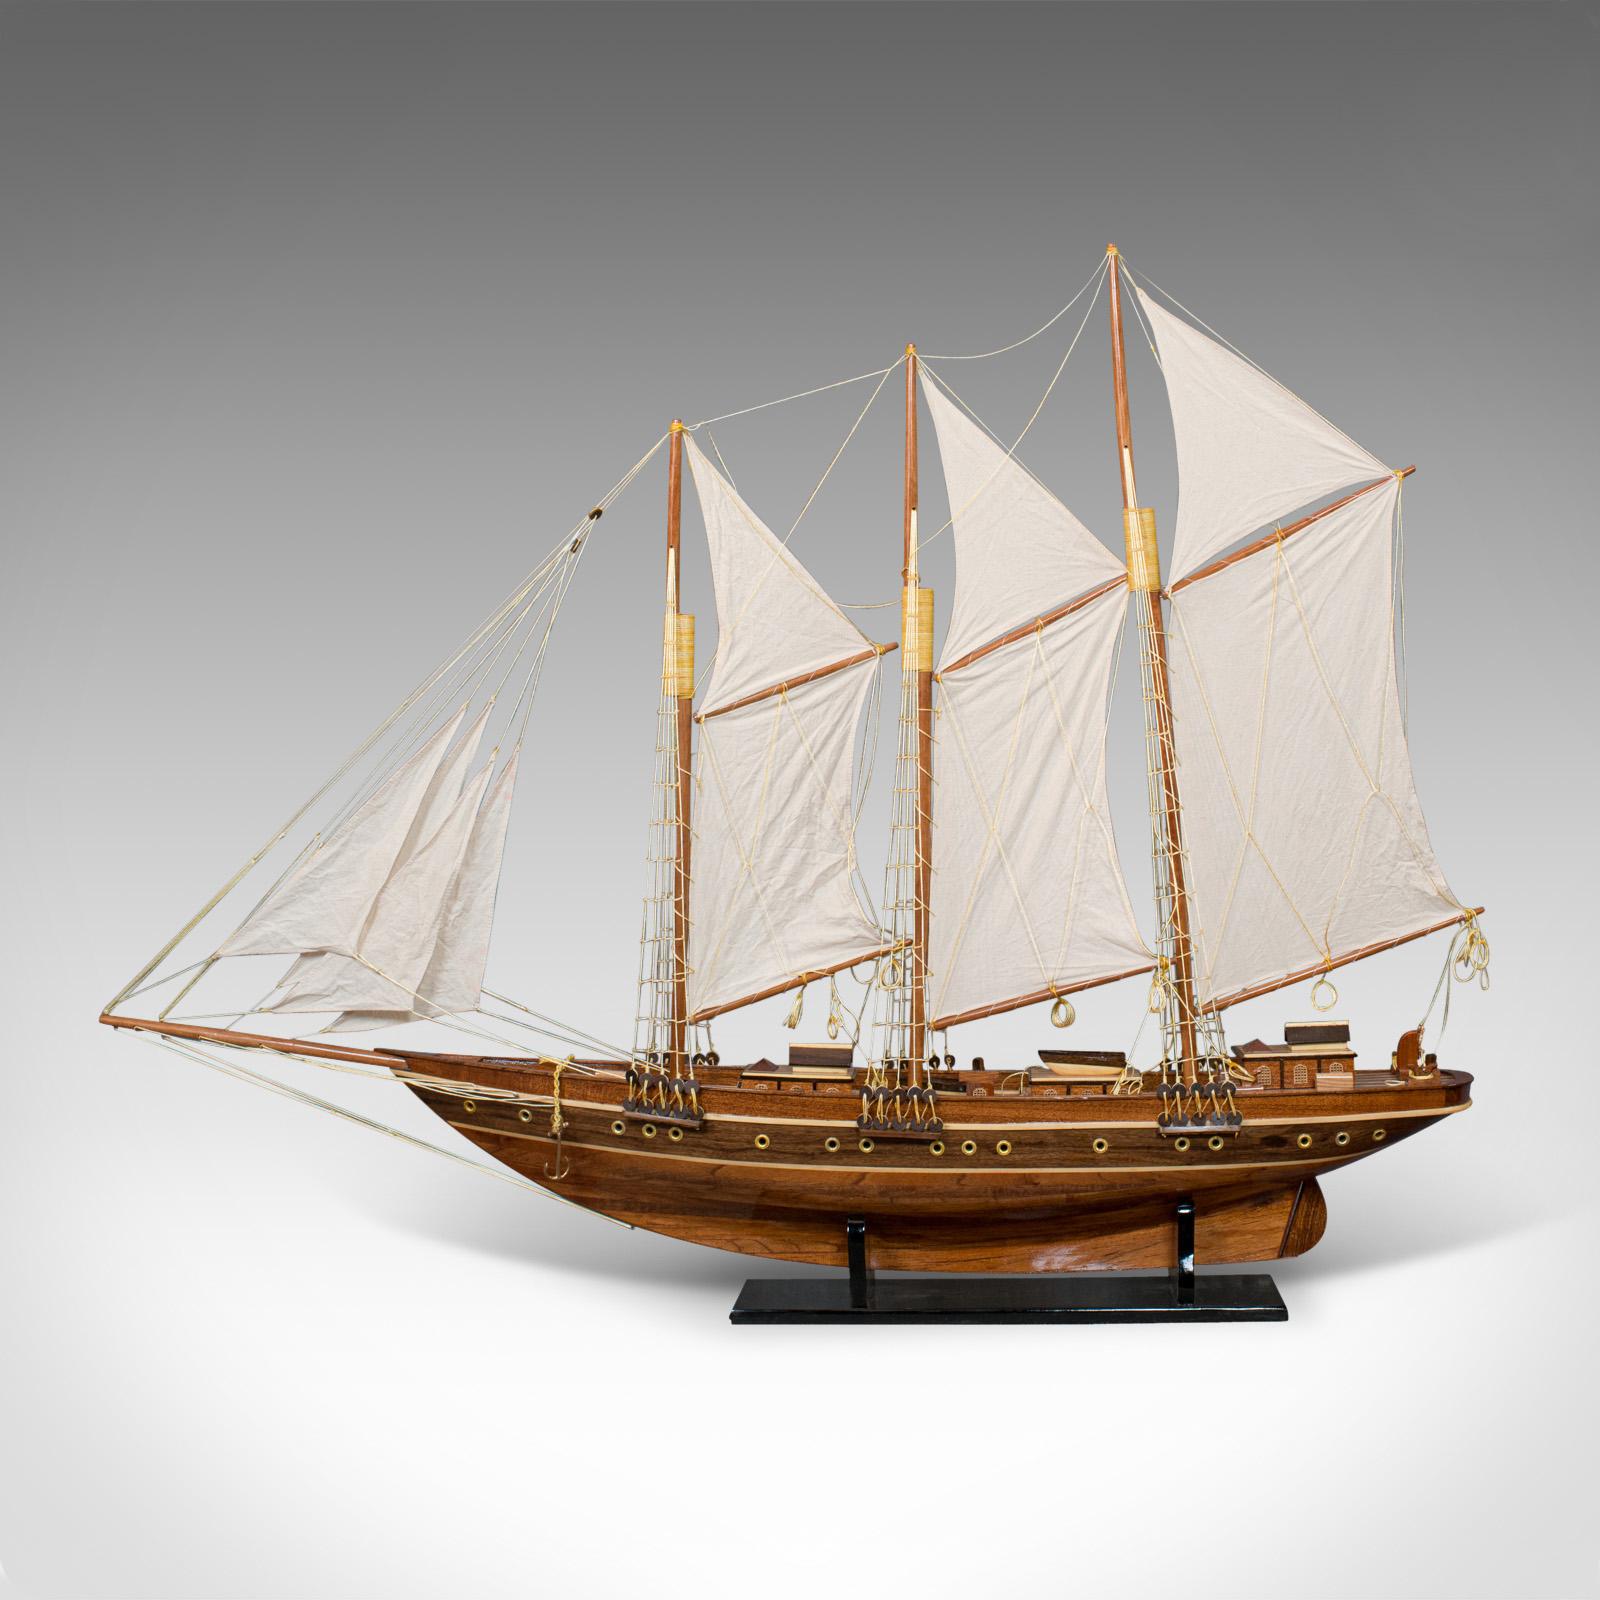 This is a large vintage model of a Classic schooner. An English, mahogany collectible or decorative yacht with display stand and dating to the 20th century.

The schooner is a type of yacht defined by its sail configuration, mostly featuring two